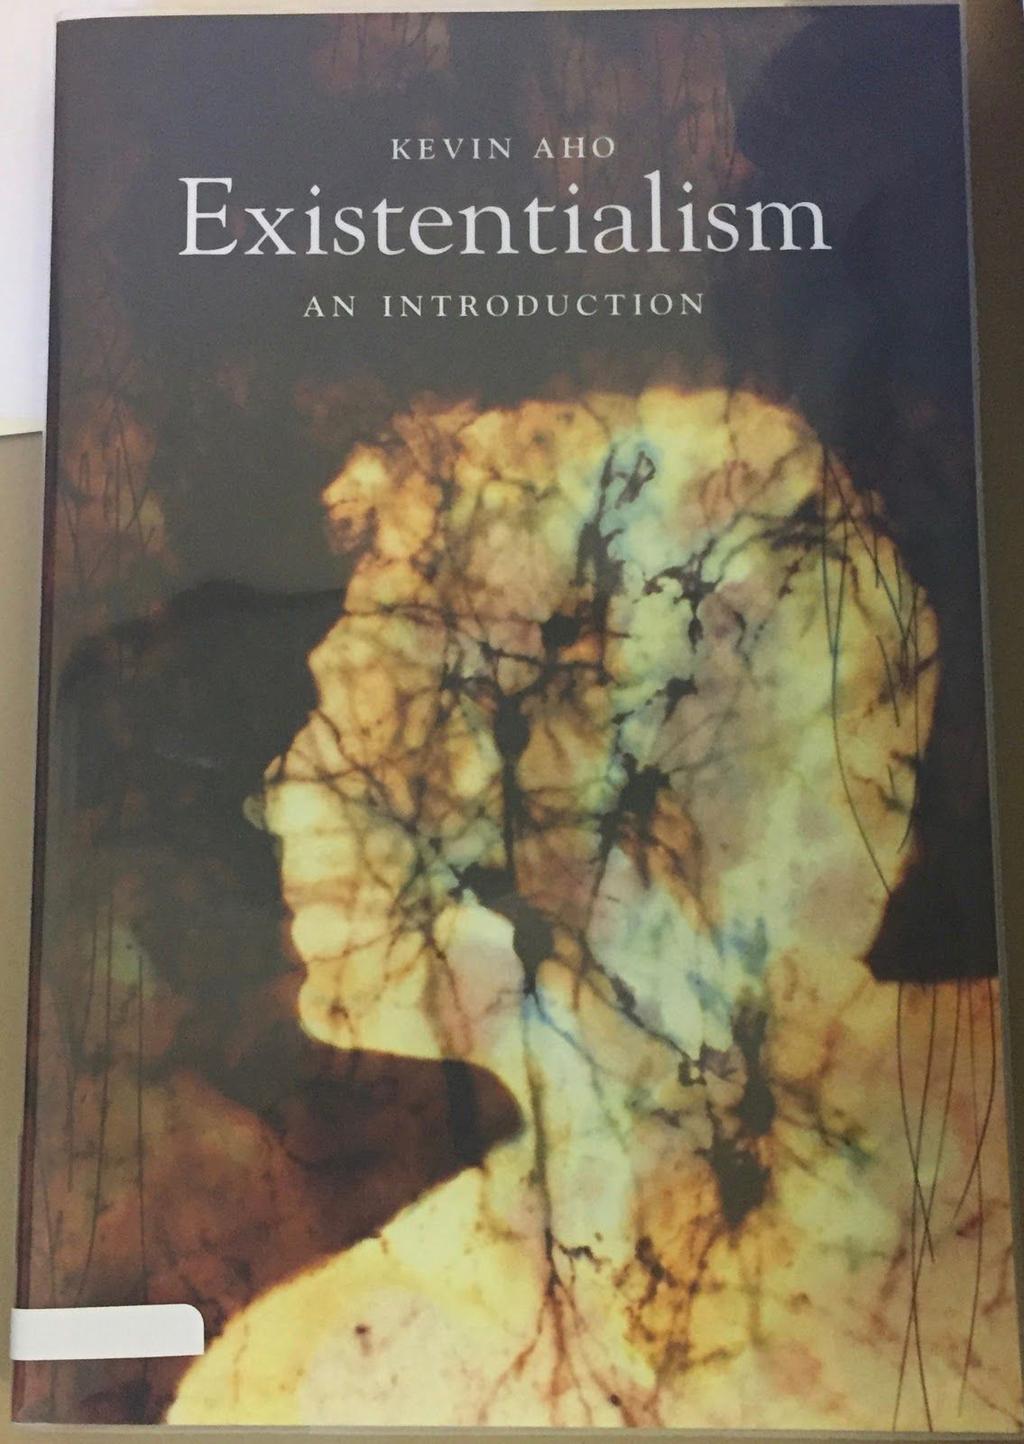 Existentialism: An Introduction by Kevin Aho This text is the ideal introduction for upper level students and anyone interested in knowing more about one of the most vibrant and important areas of